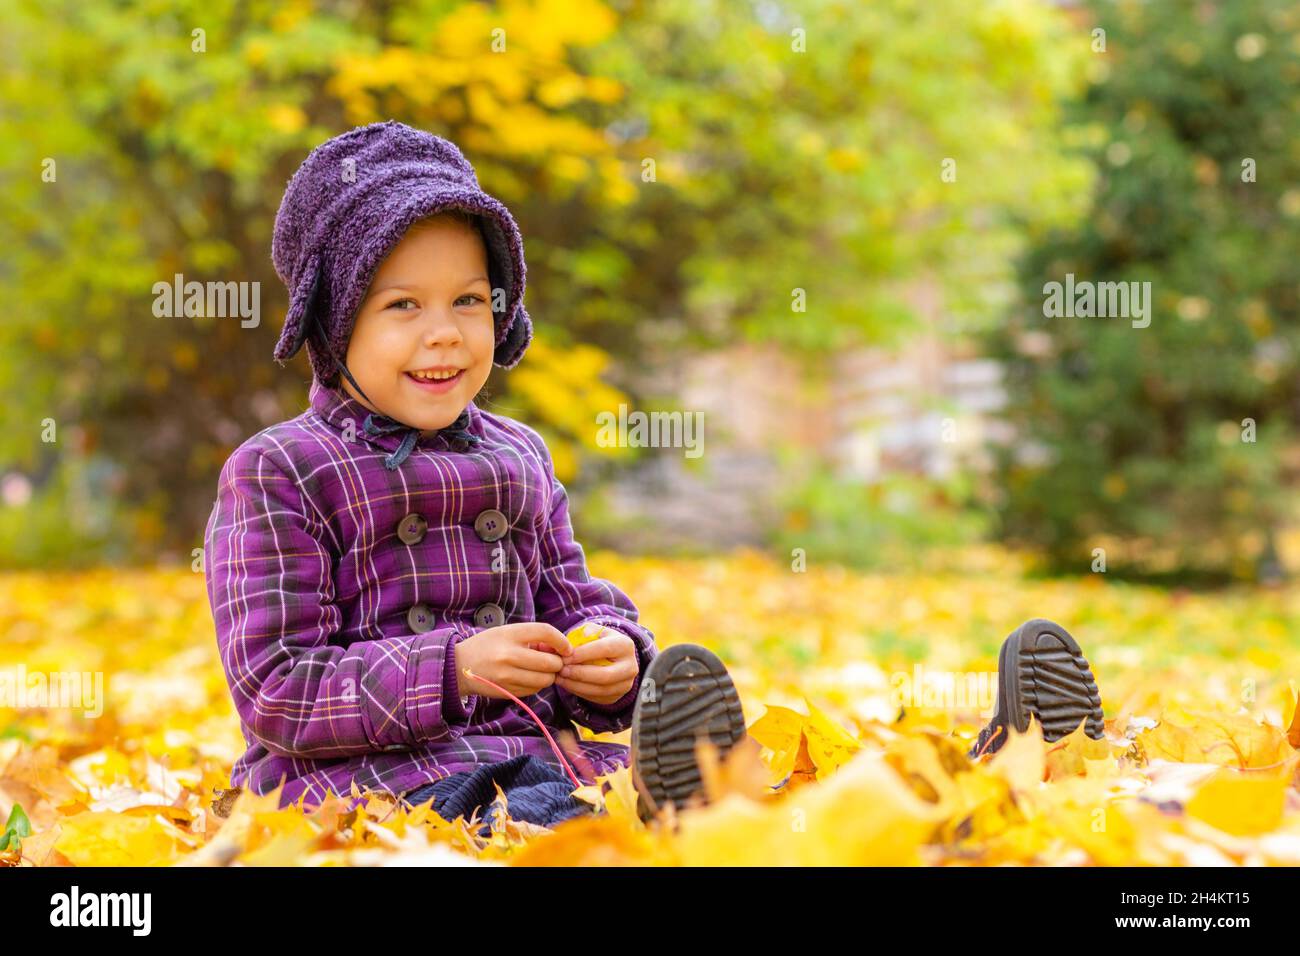 Caucasian little girl of five years old sitting on ground with yellow leaves in the autumn park Stock Photo